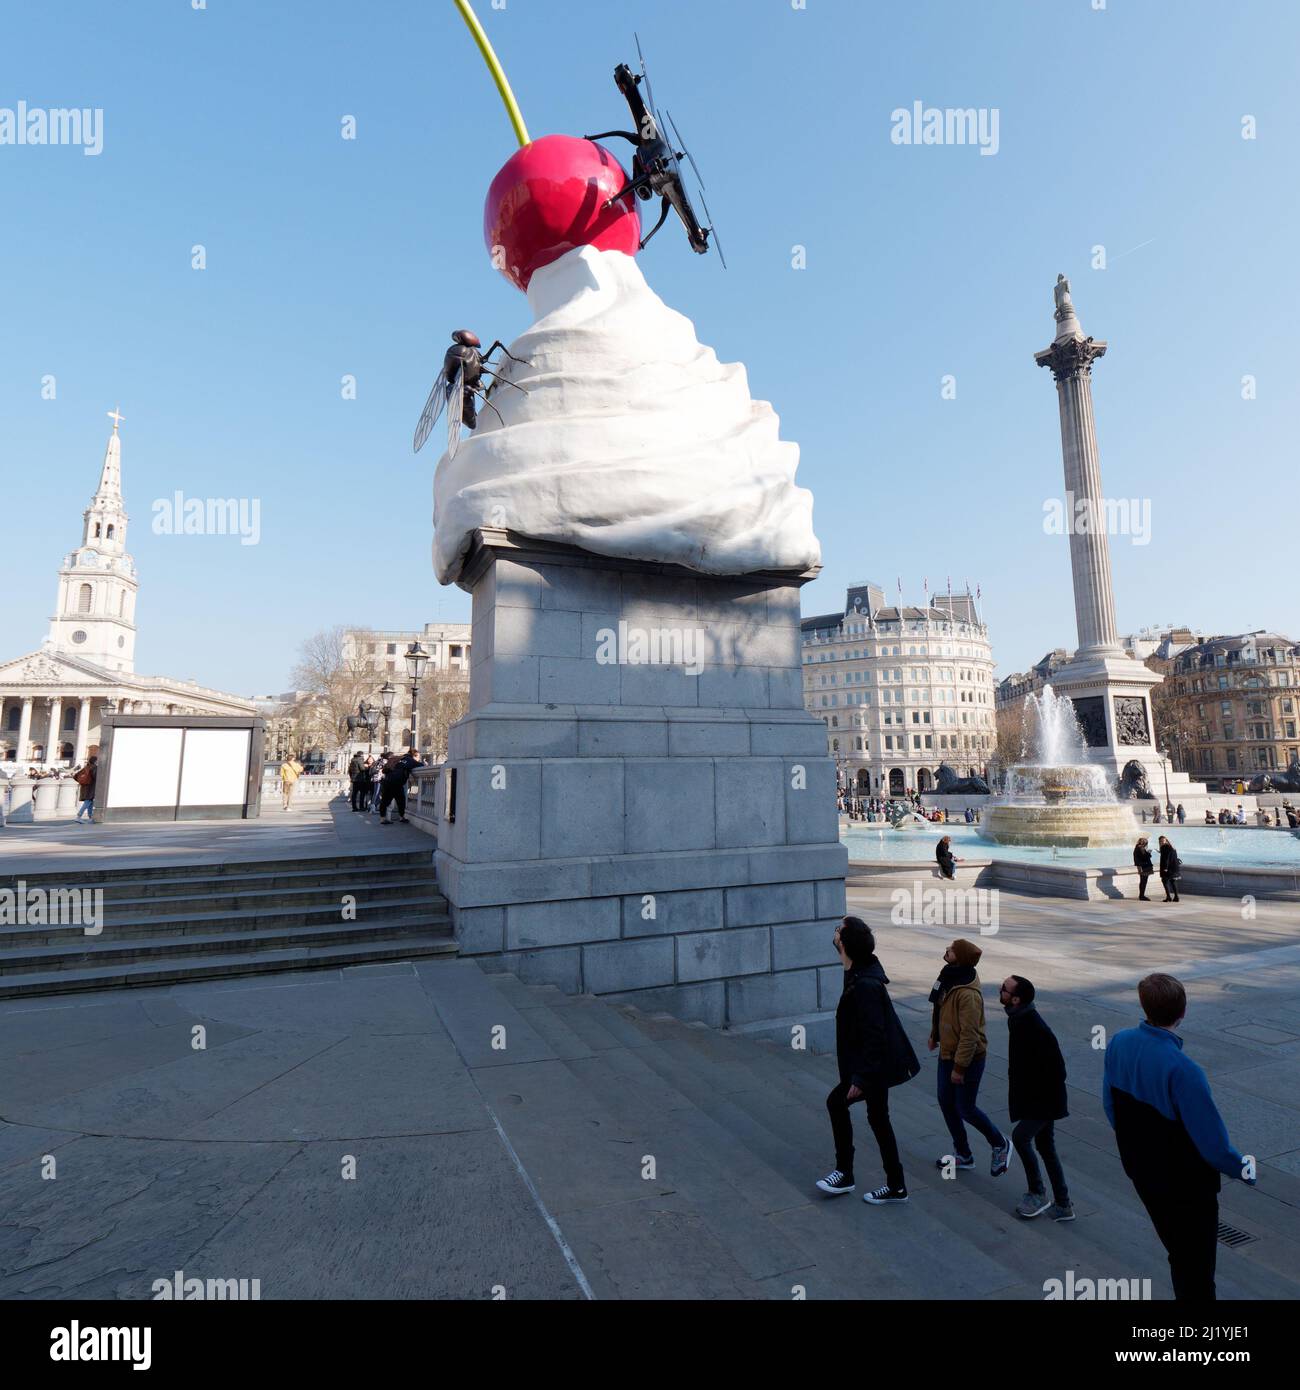 London, Greater London, England, March 08 2022: Tourists glance at Trafalgar Squares Fourth Plinth of a whipped cream, cherry and fly sculpture. Stock Photo